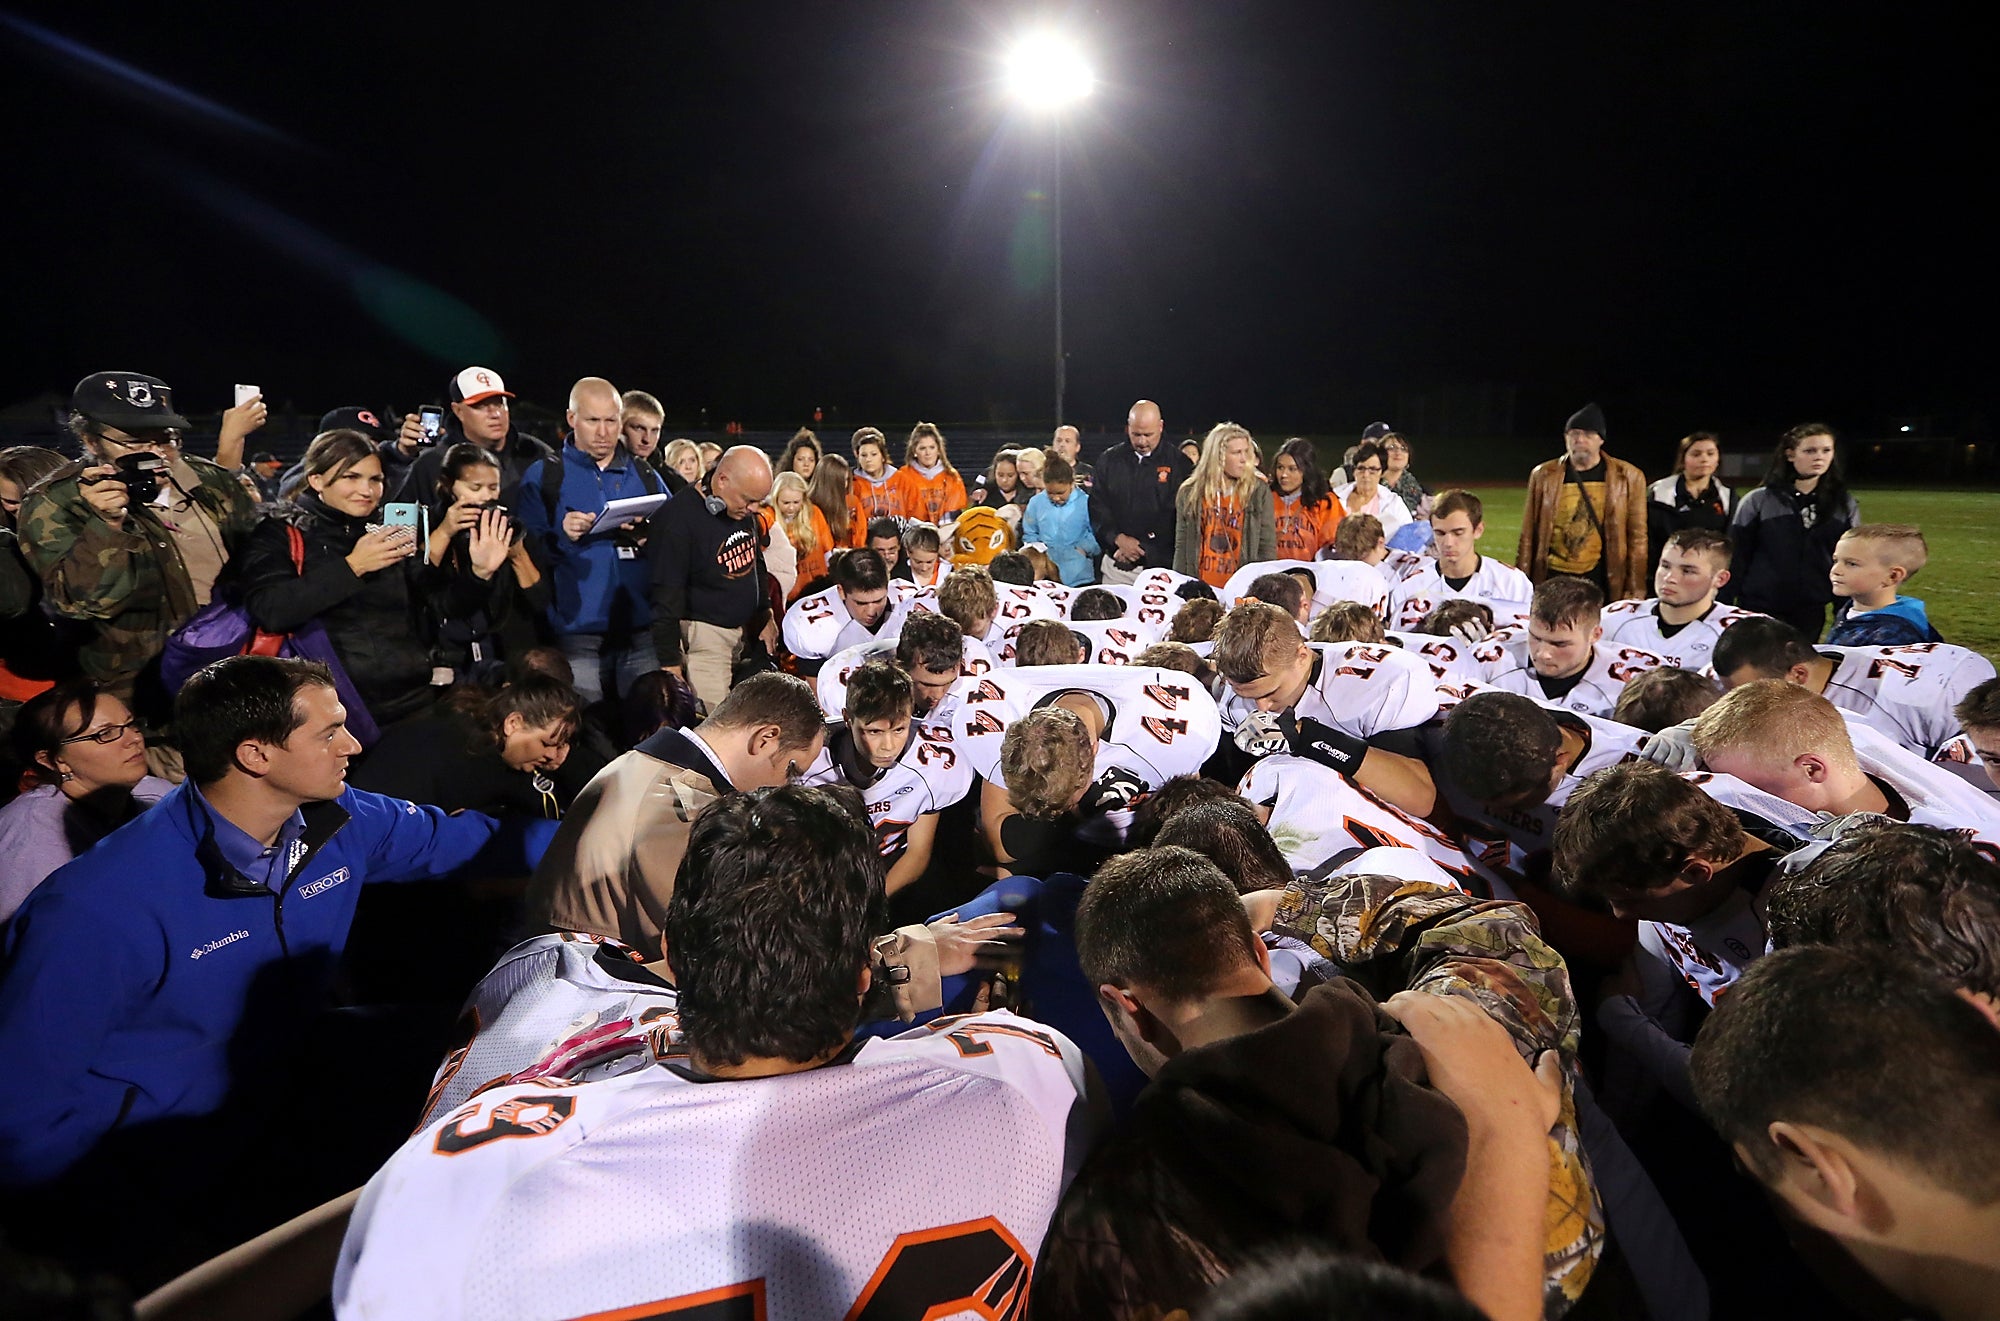 Assistant football coach Joe Kennedy is surrounded by football players as they kneel and pray with him on the field after their game in 2015.